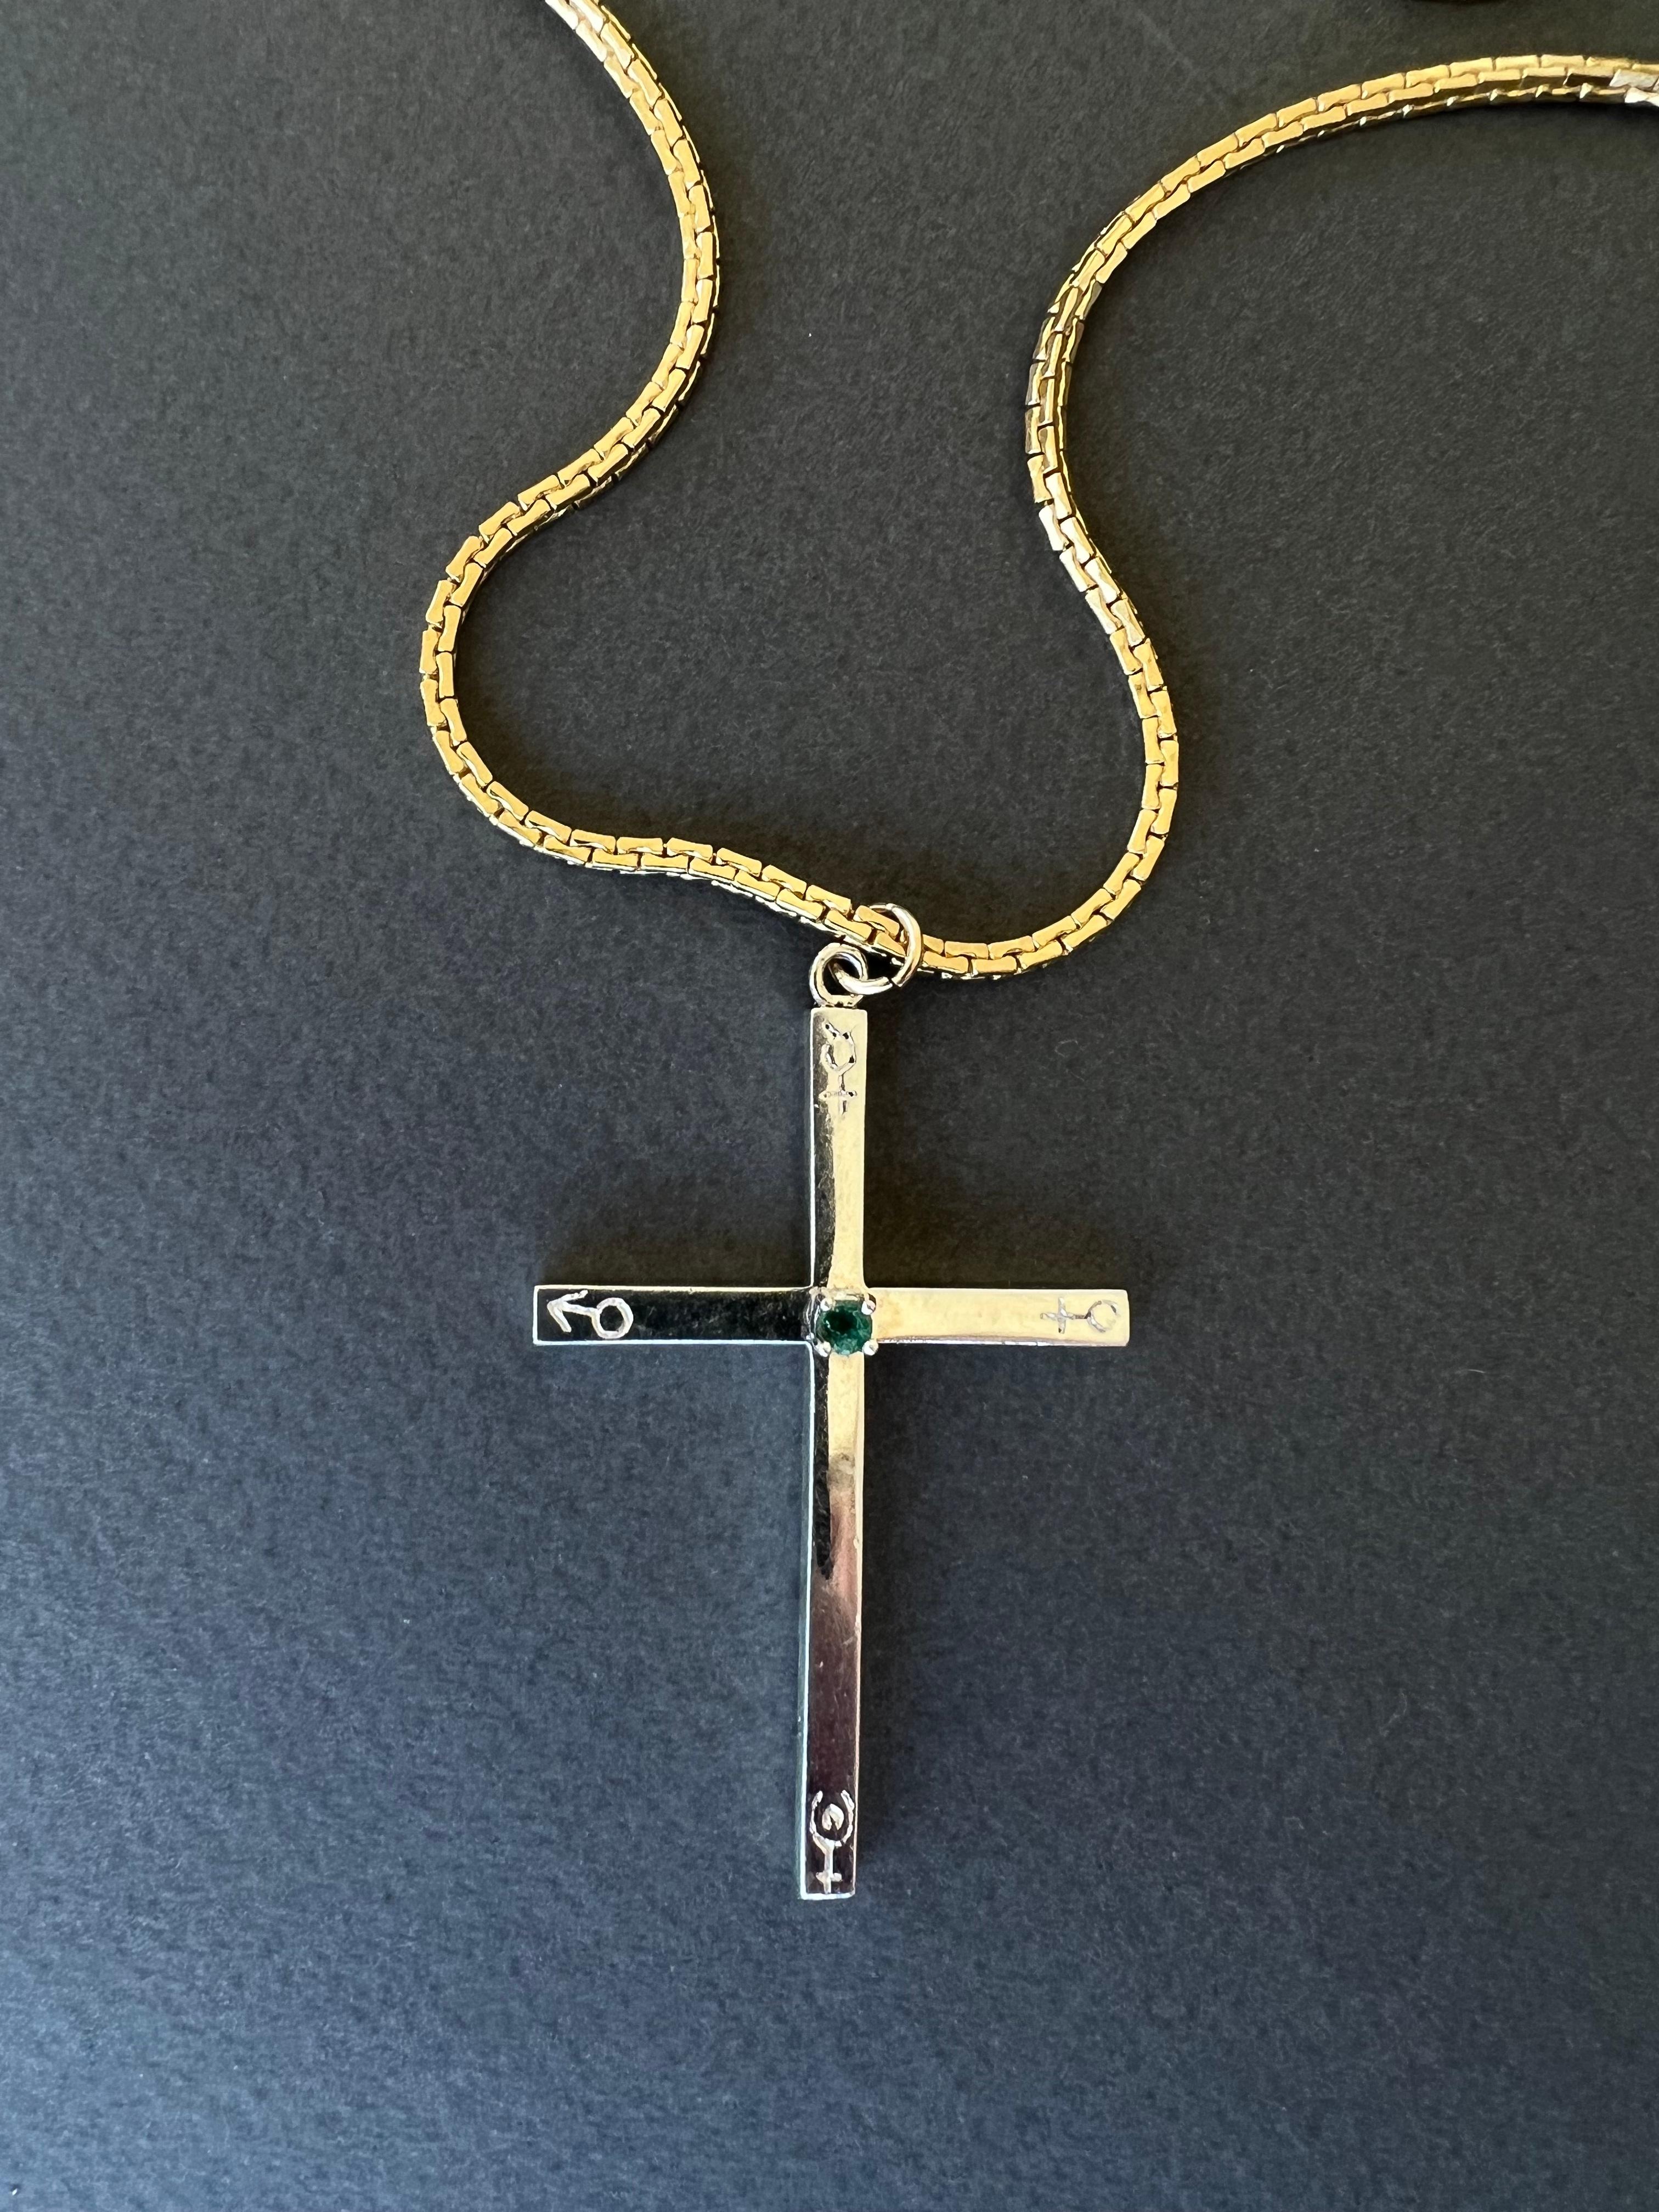 Emerald Cross Necklace Engraved Astrology Symbols Spiritual Balance Healing In New Condition For Sale In Los Angeles, CA